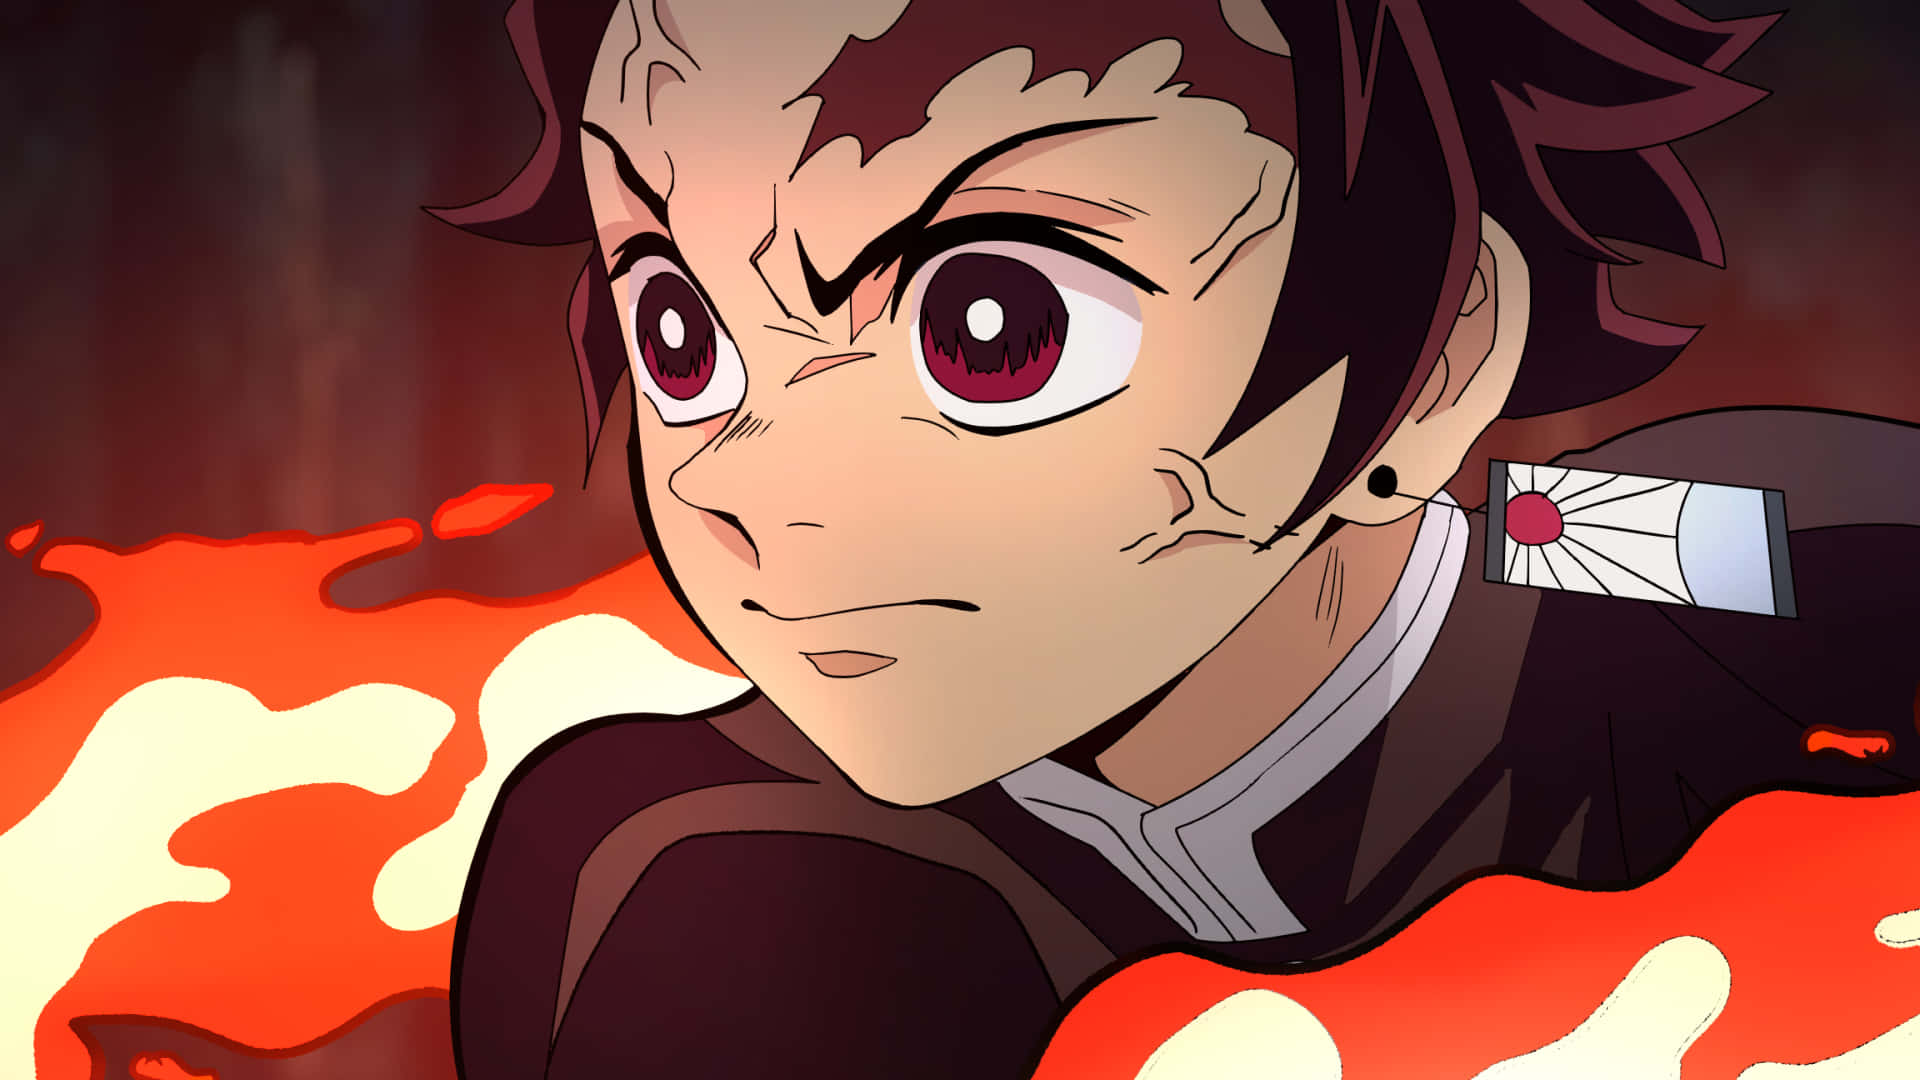 Tanjiro Kamado is determined to save his family and become the best demon slayer